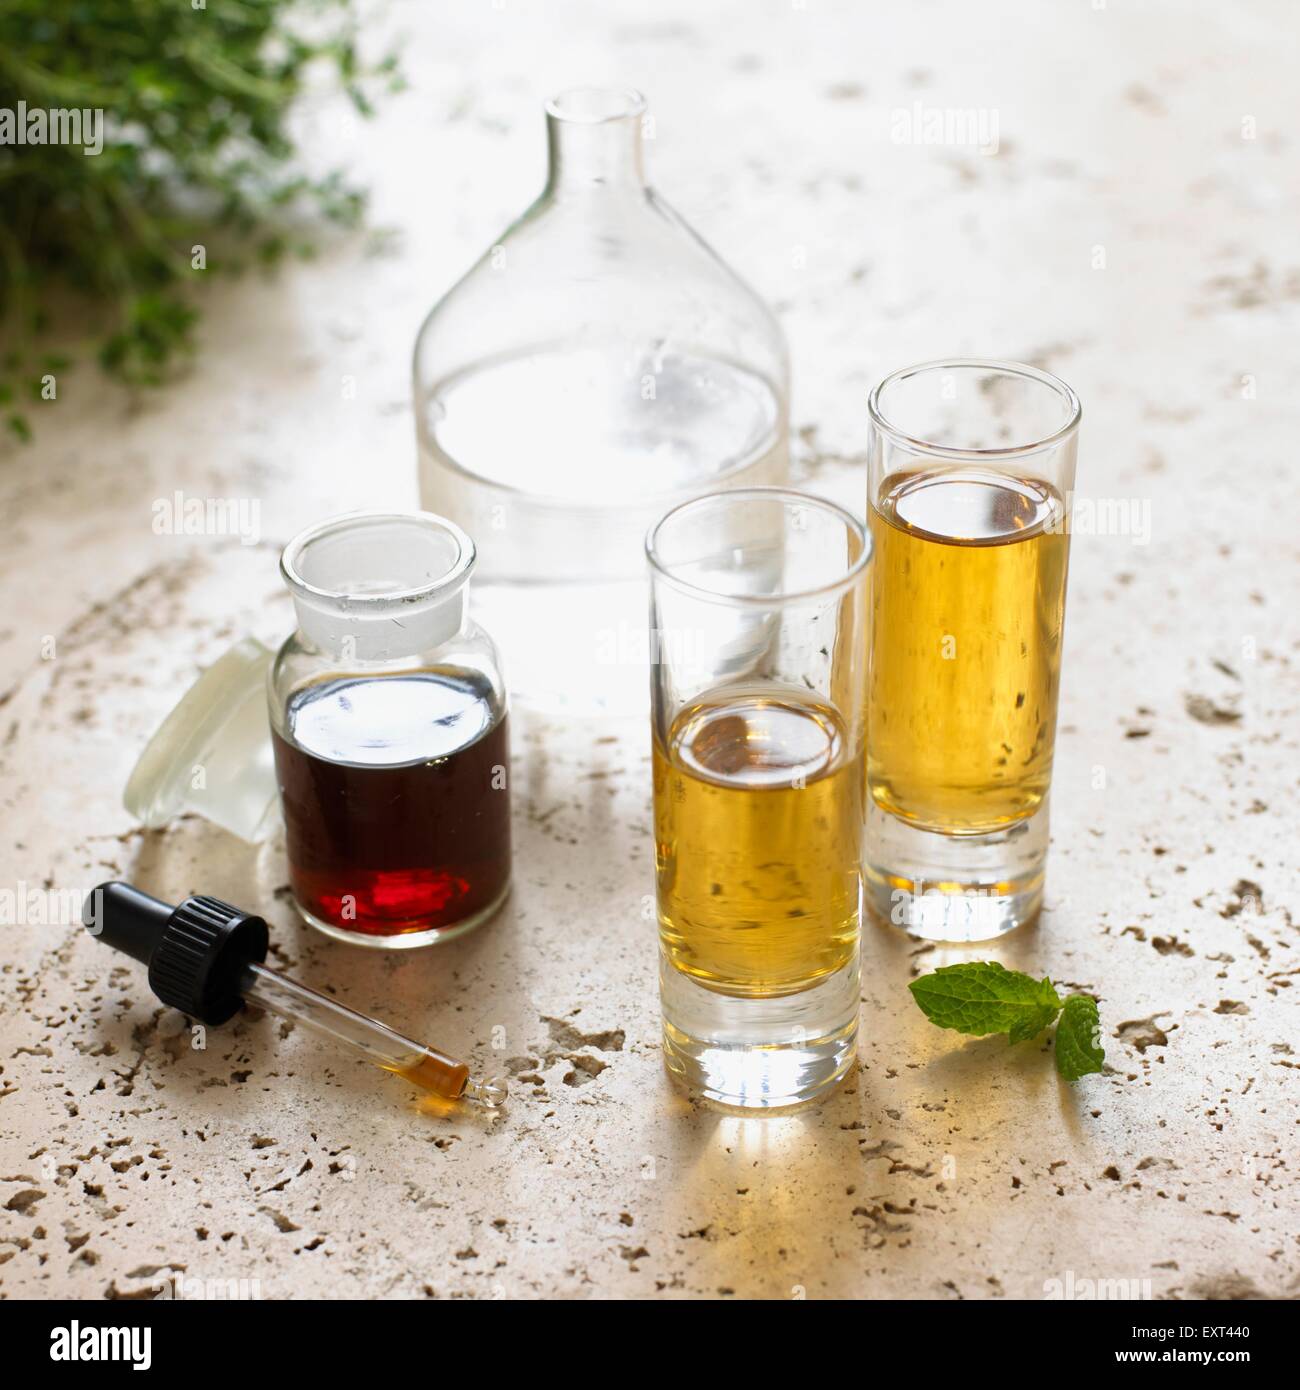 Peppermint and thyme tincture in bottle and pipette, and two glasses containing tincture diluted with water Stock Photo